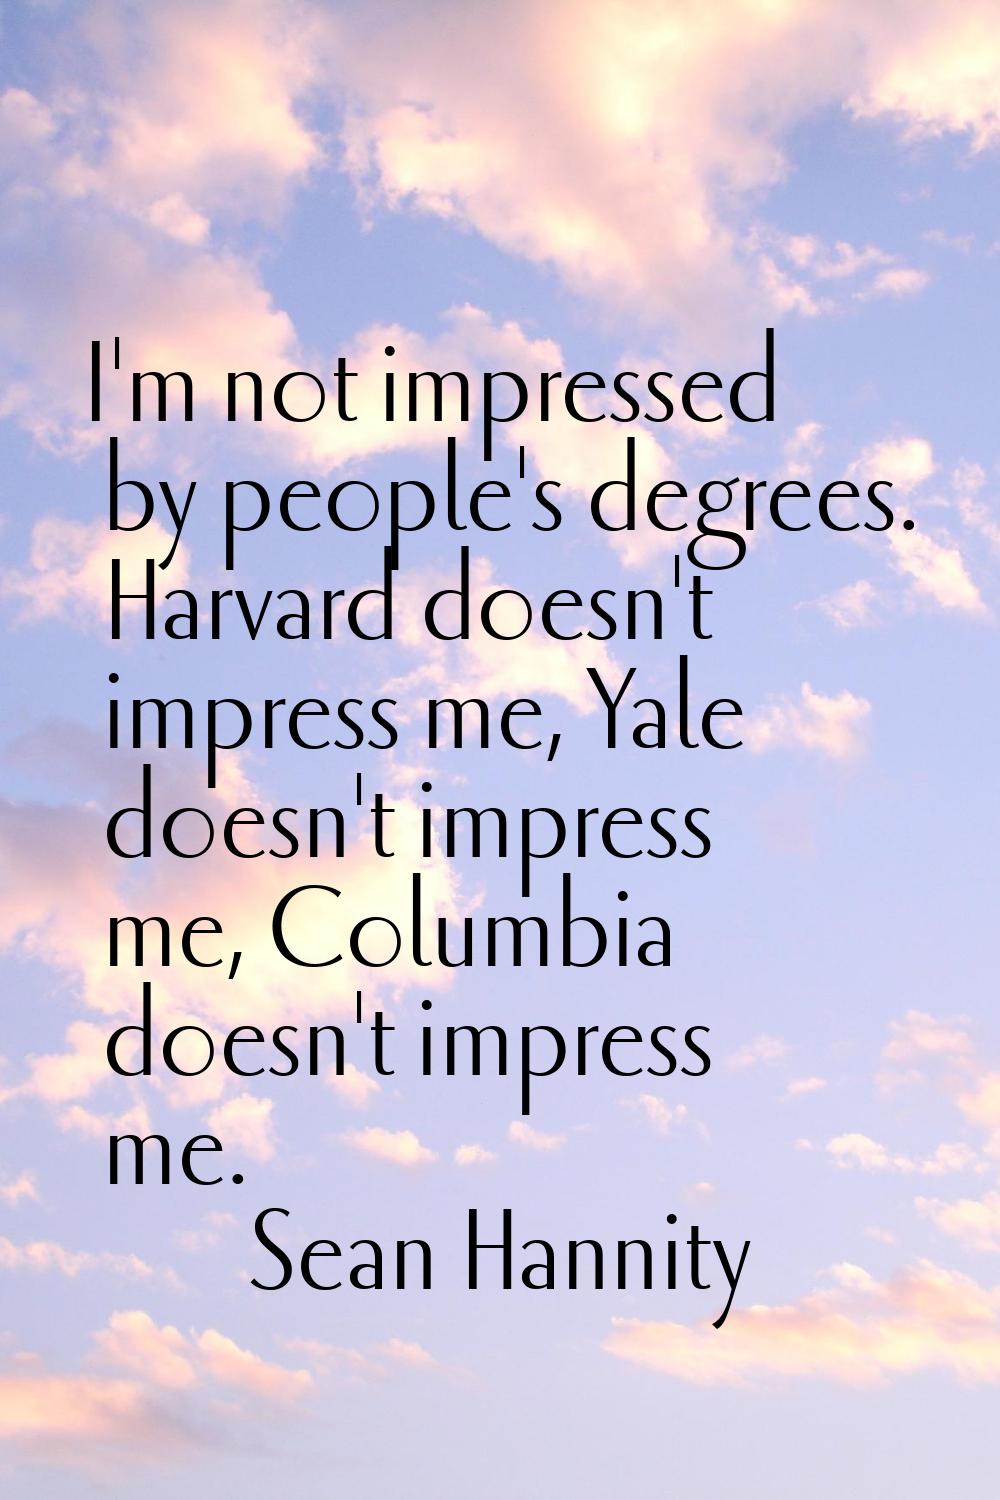 I'm not impressed by people's degrees. Harvard doesn't impress me, Yale doesn't impress me, Columbi